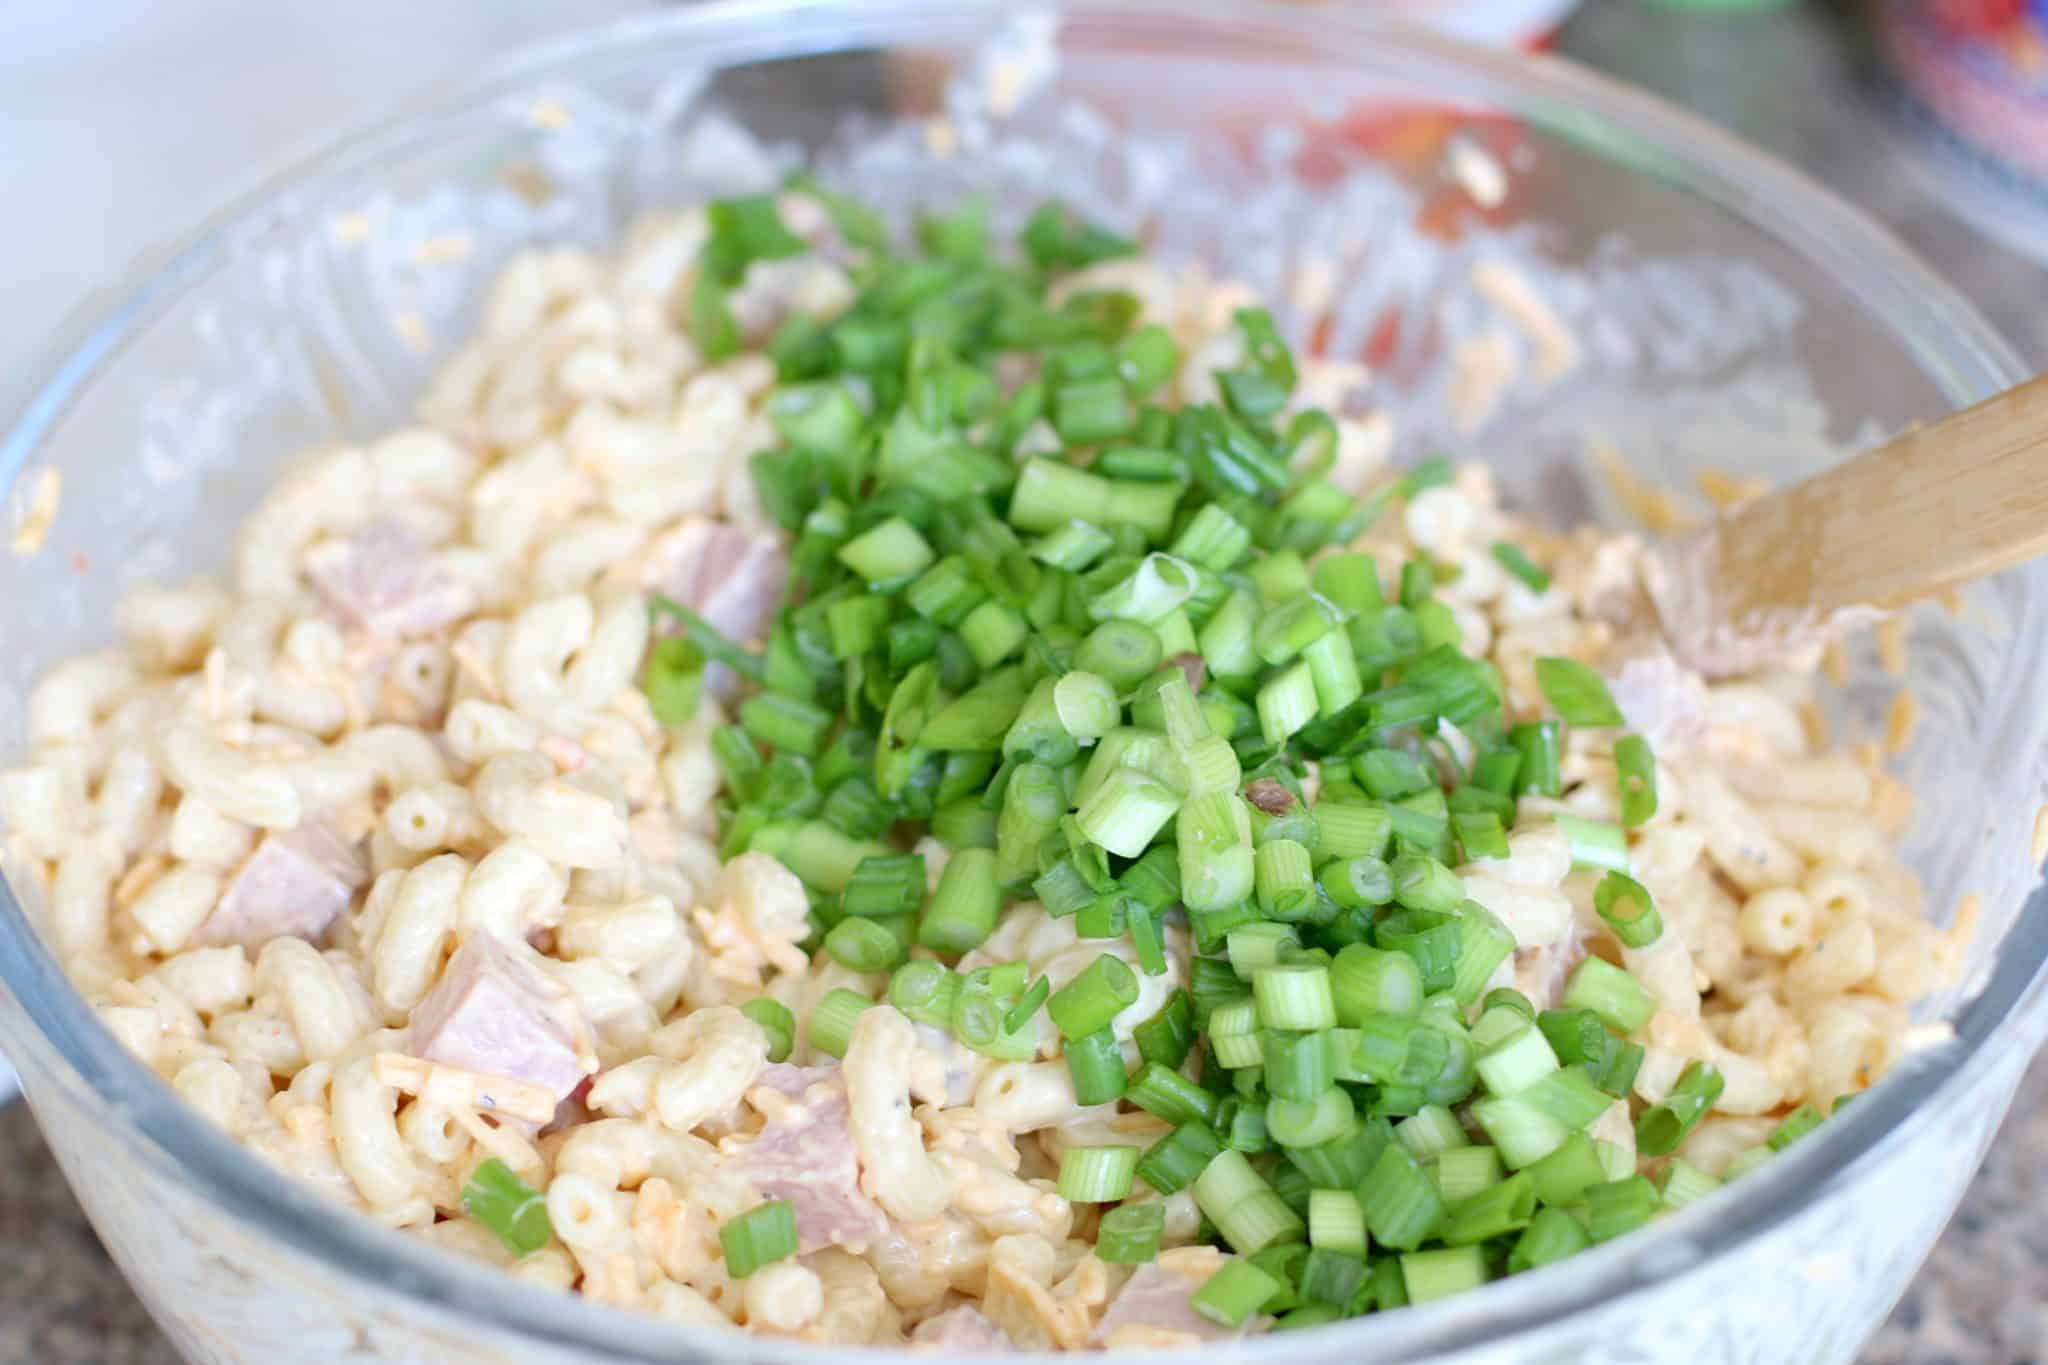 green onion, ham, macaroni salad with mayonnaise, salt and pepper in a large bowl stirred with a wooden spoon.